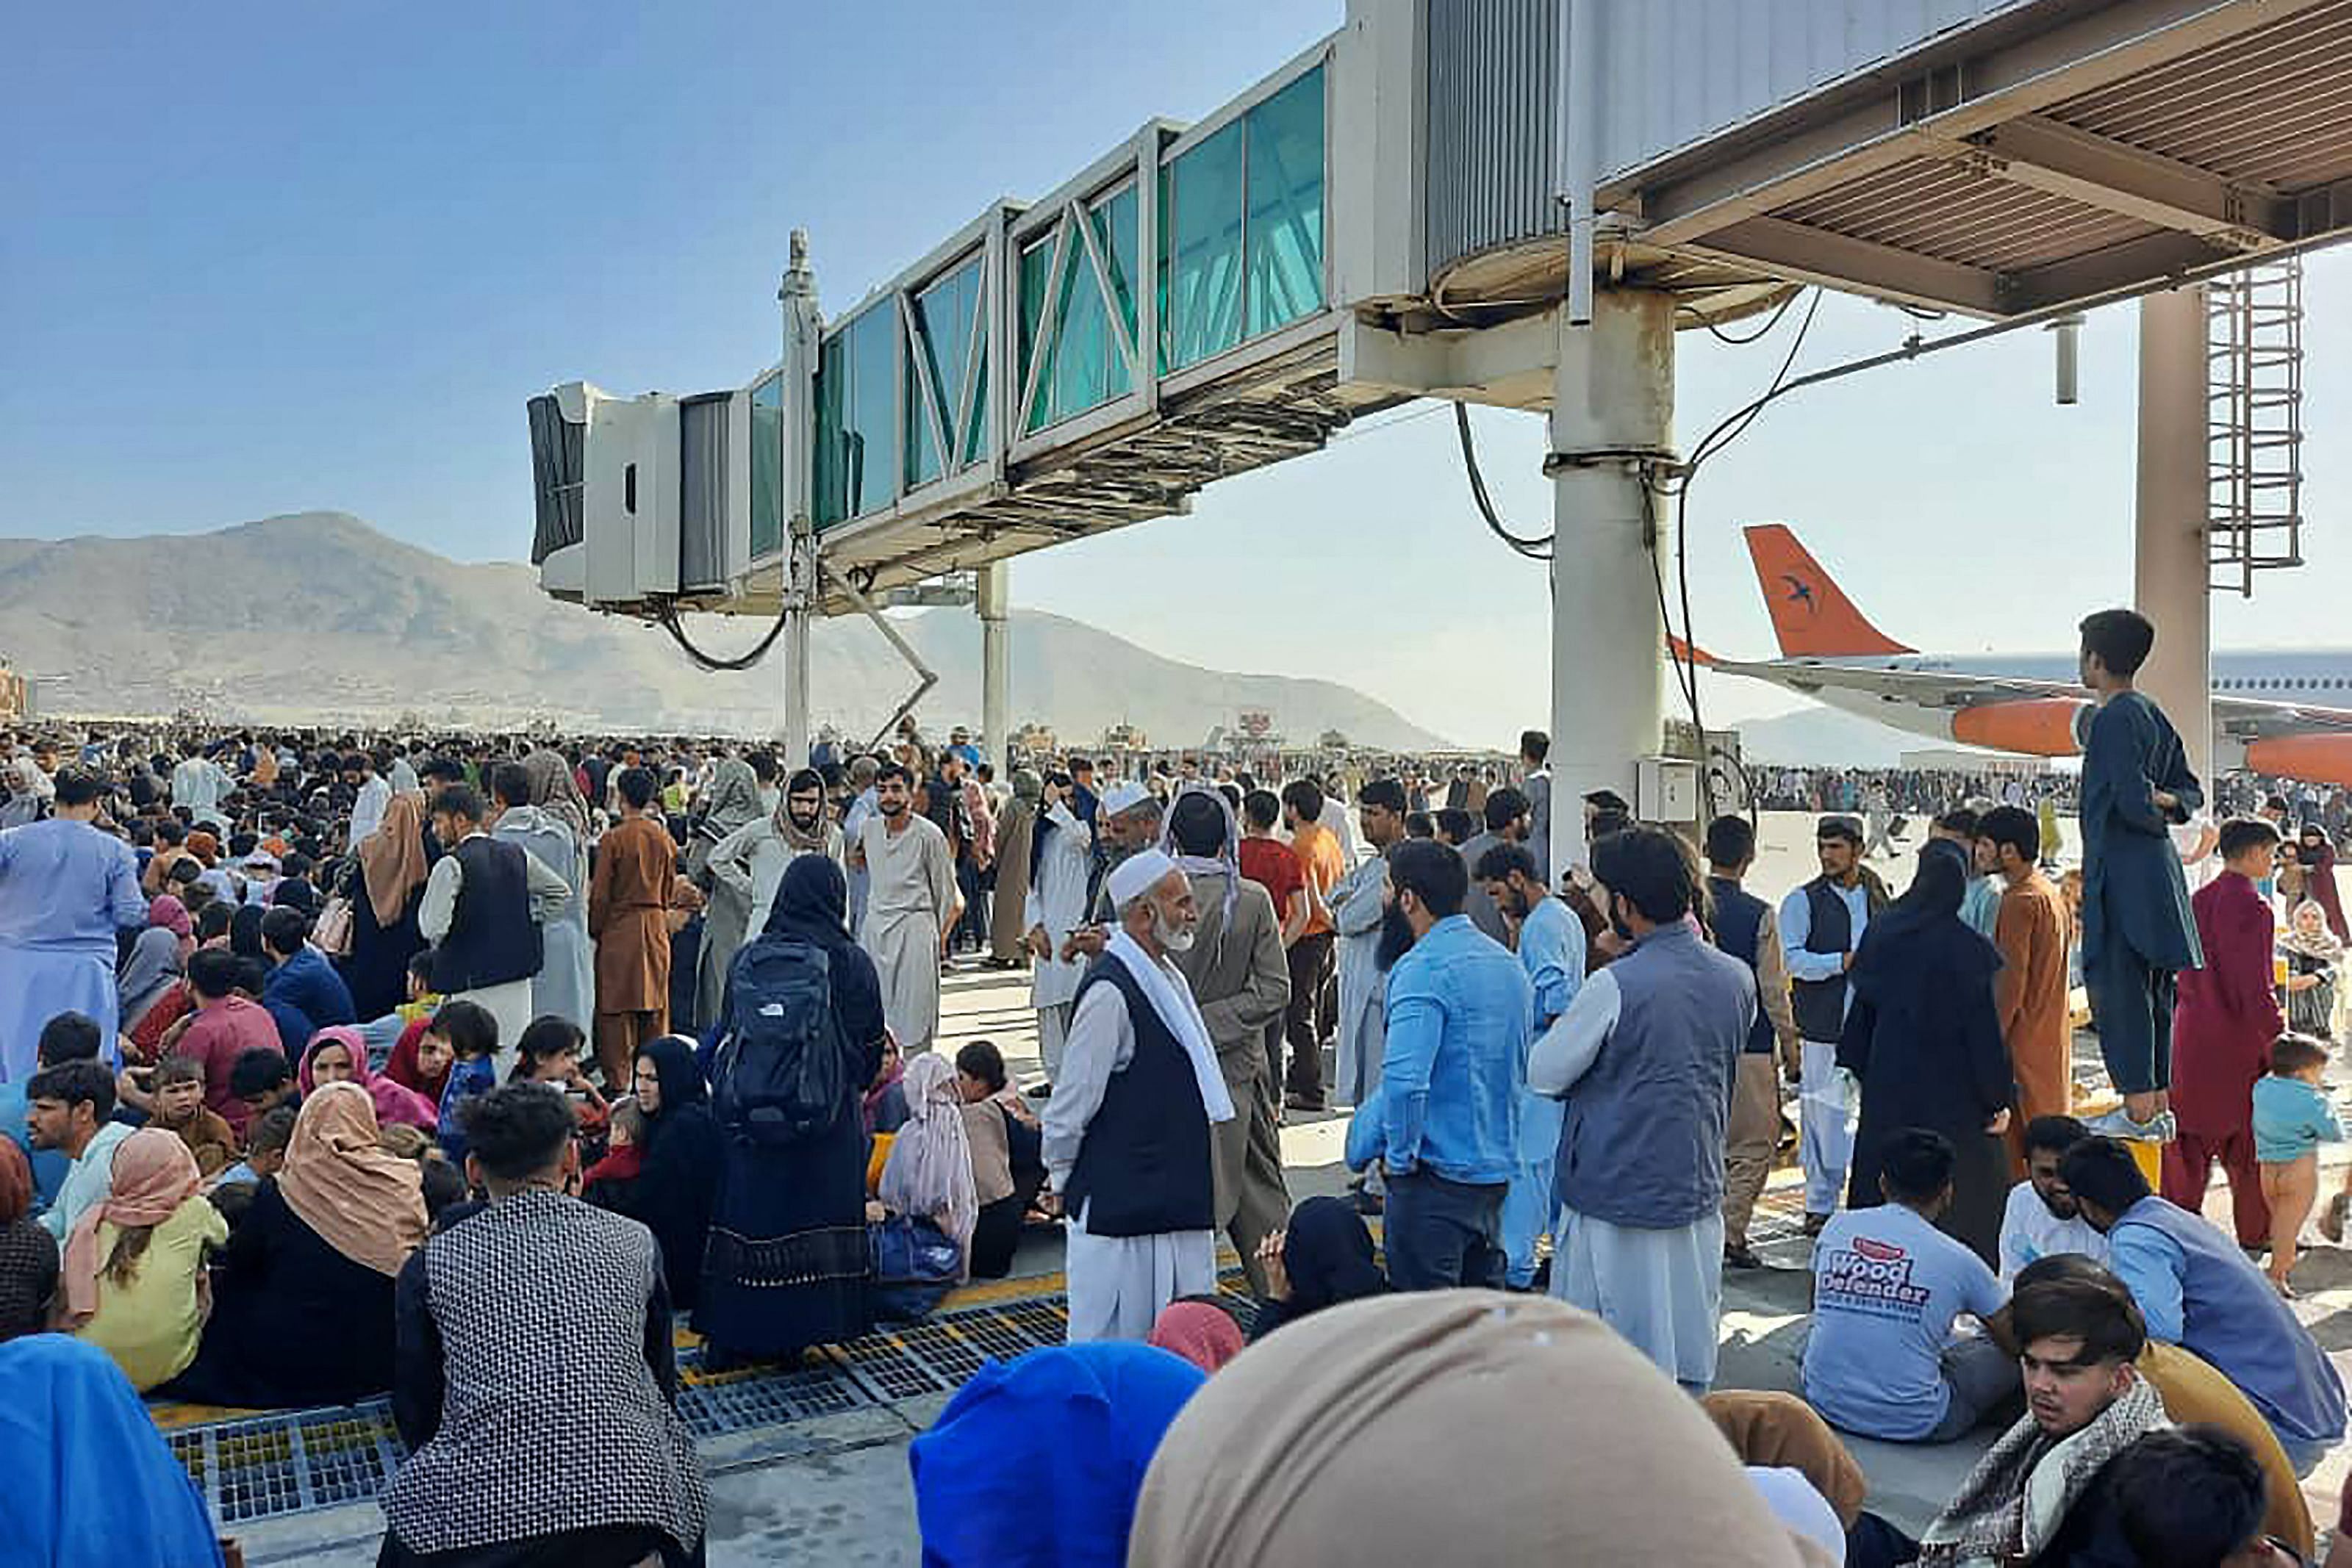 Thousands of Afghans rushed into Kabul's main airport on Monday, some so desperate to escape the Taliban that they held onto a military jet as it took off and plunged to their deaths. Credit: AFP Photo